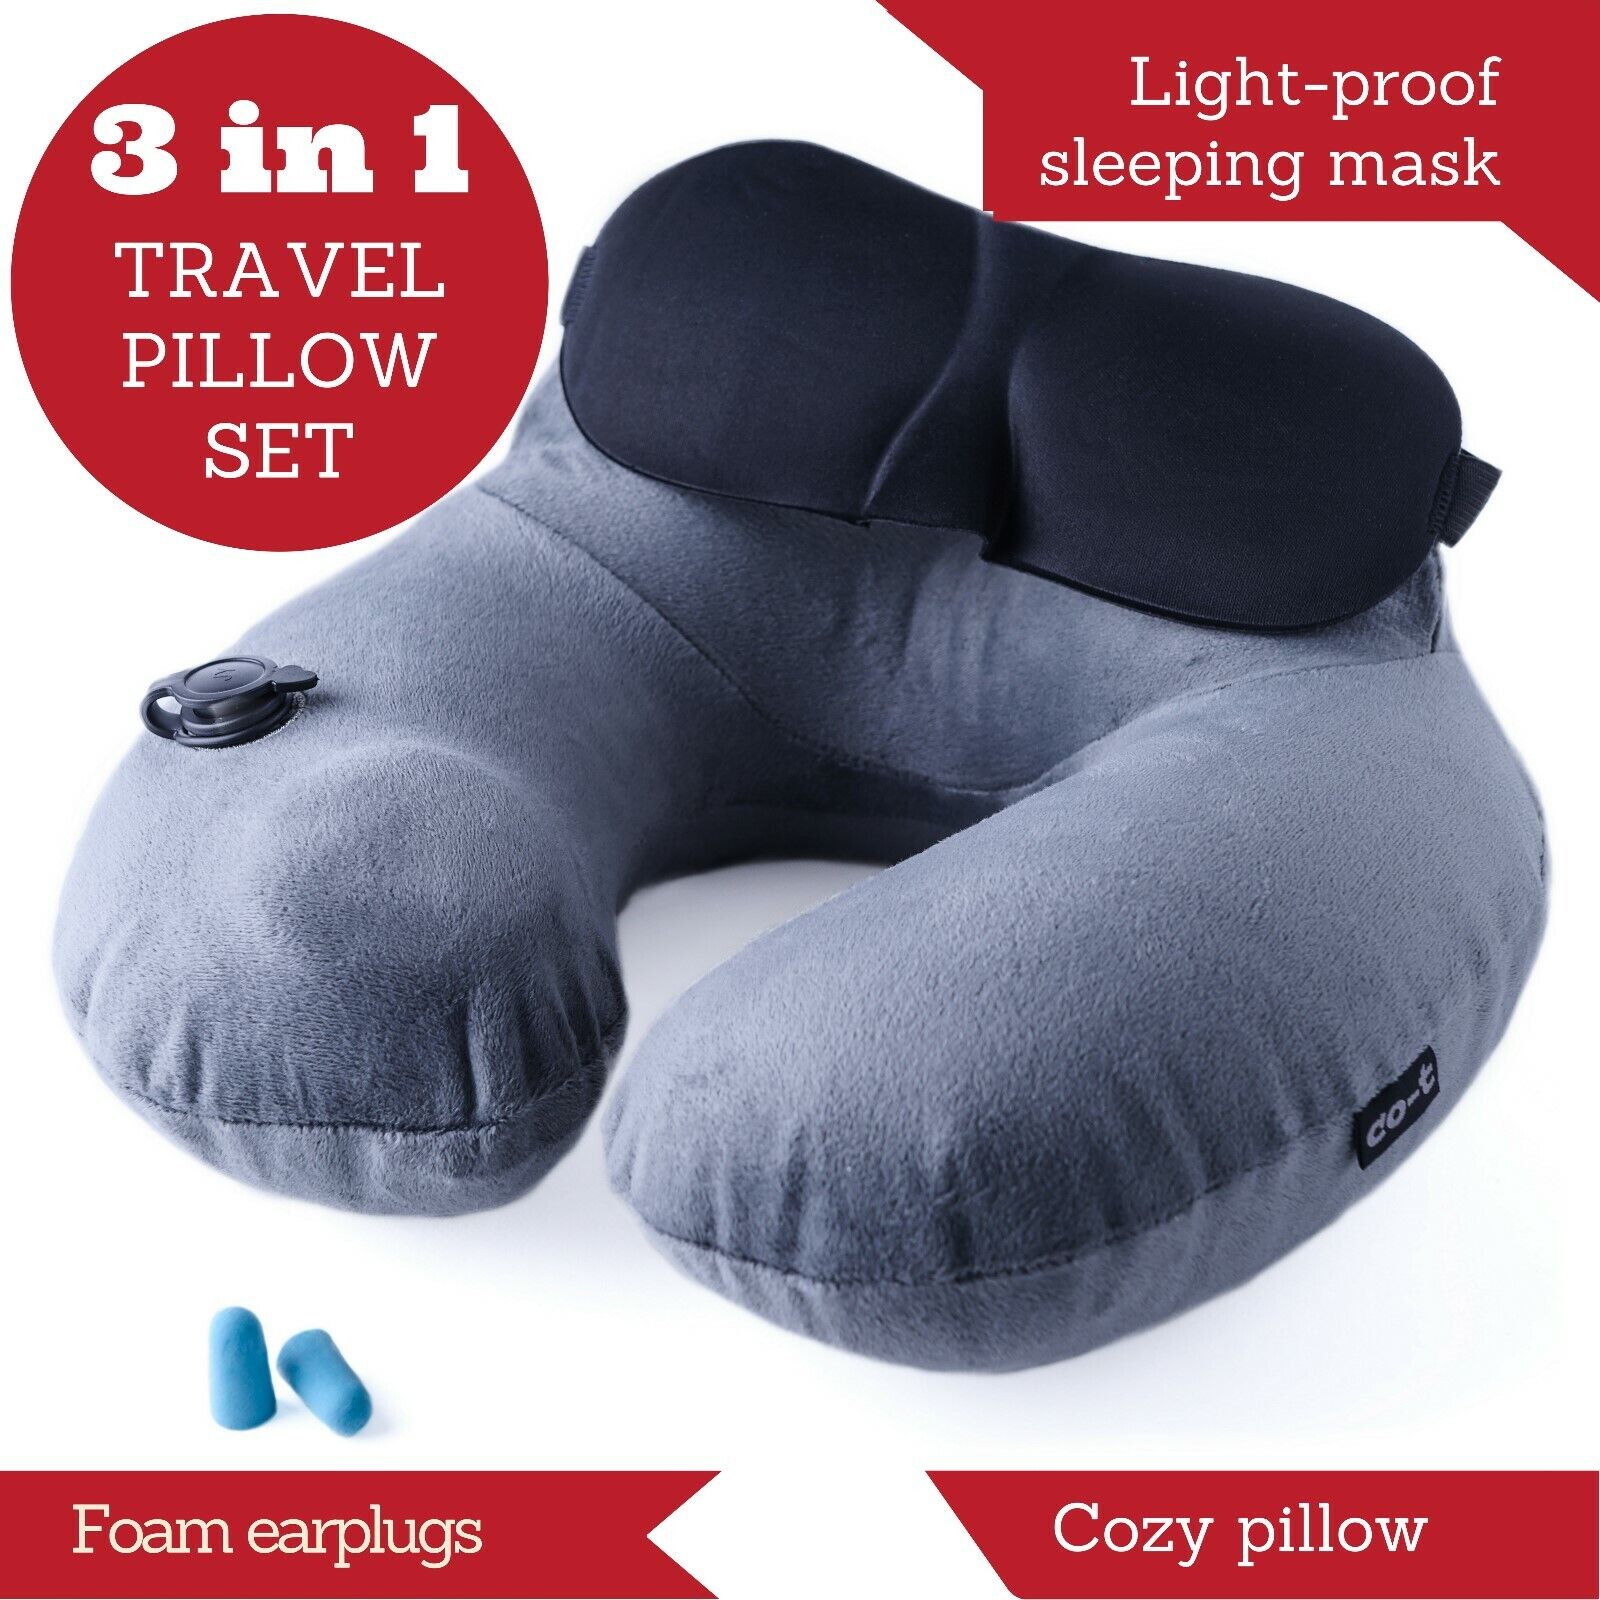 Airplane Inflatable Travel Pillow Set - Neck Pillow